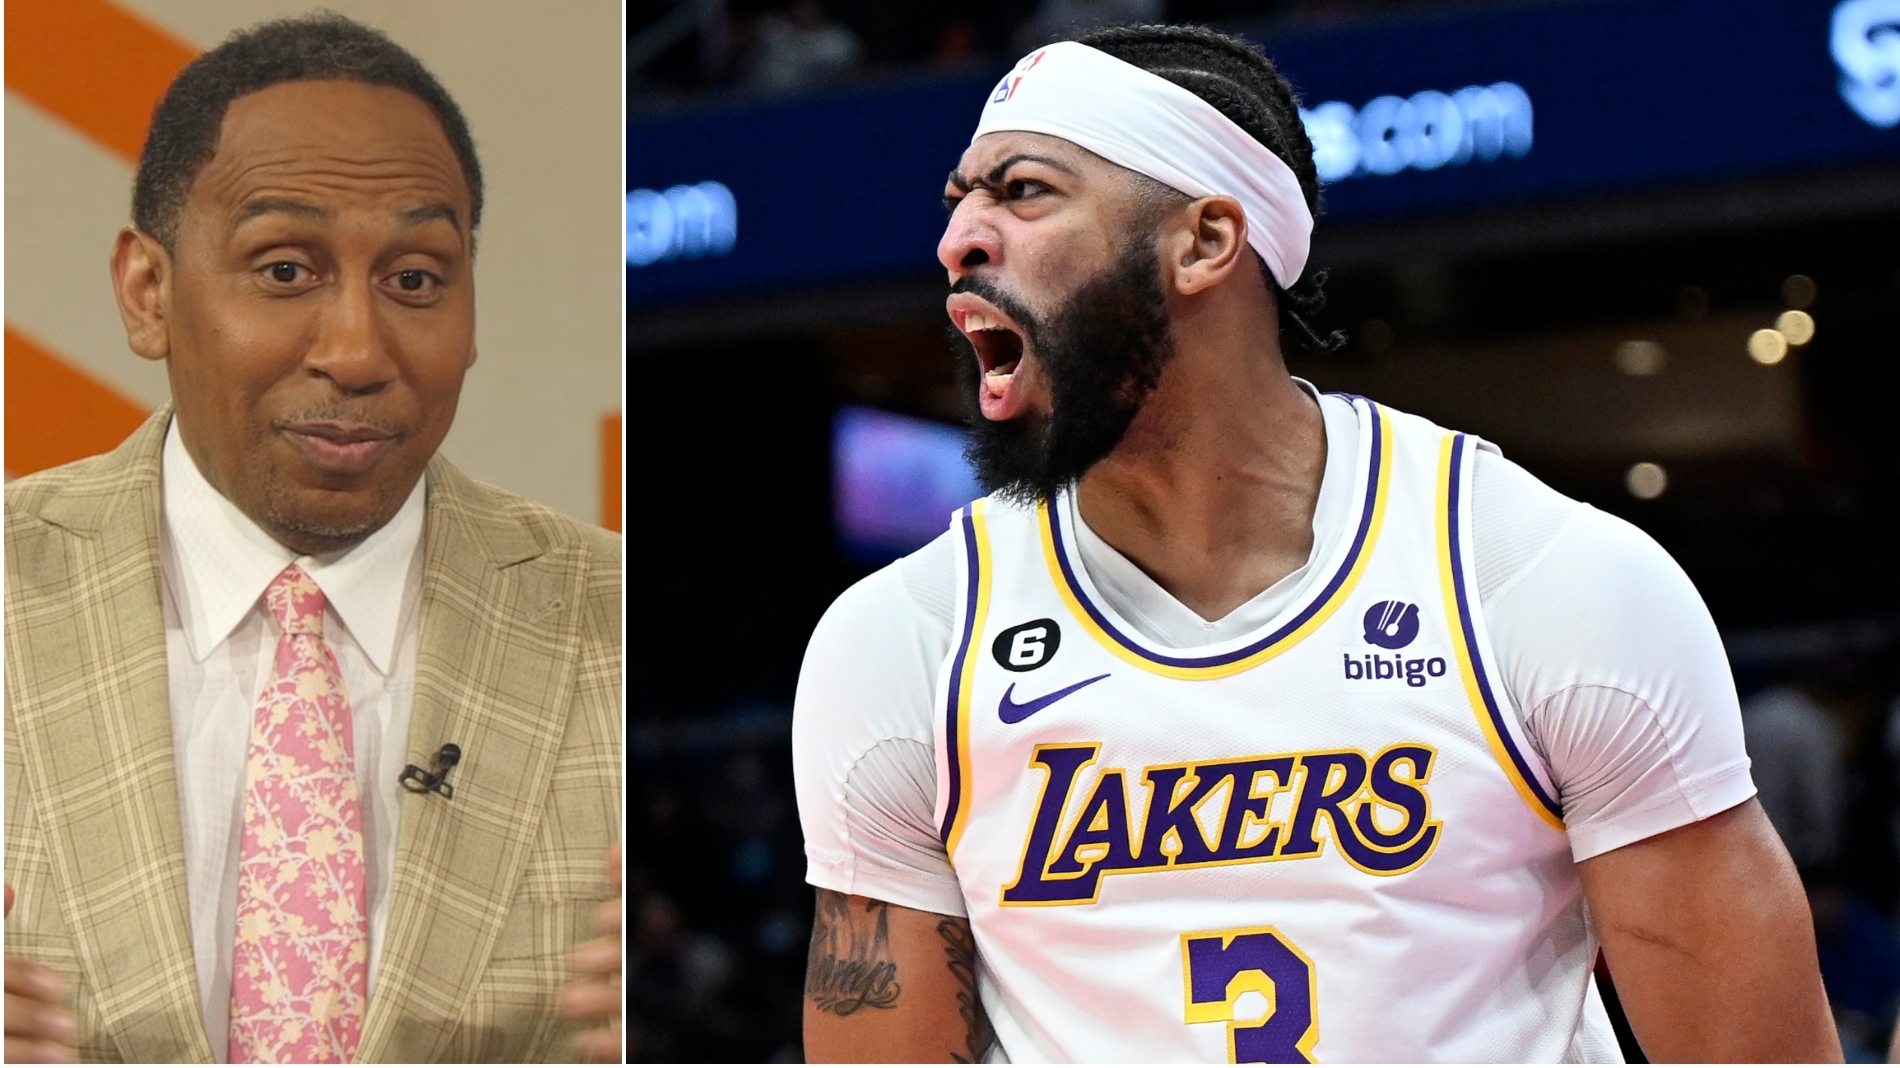 Stephen A.: Anthony Davis is making the Lakers relevant again